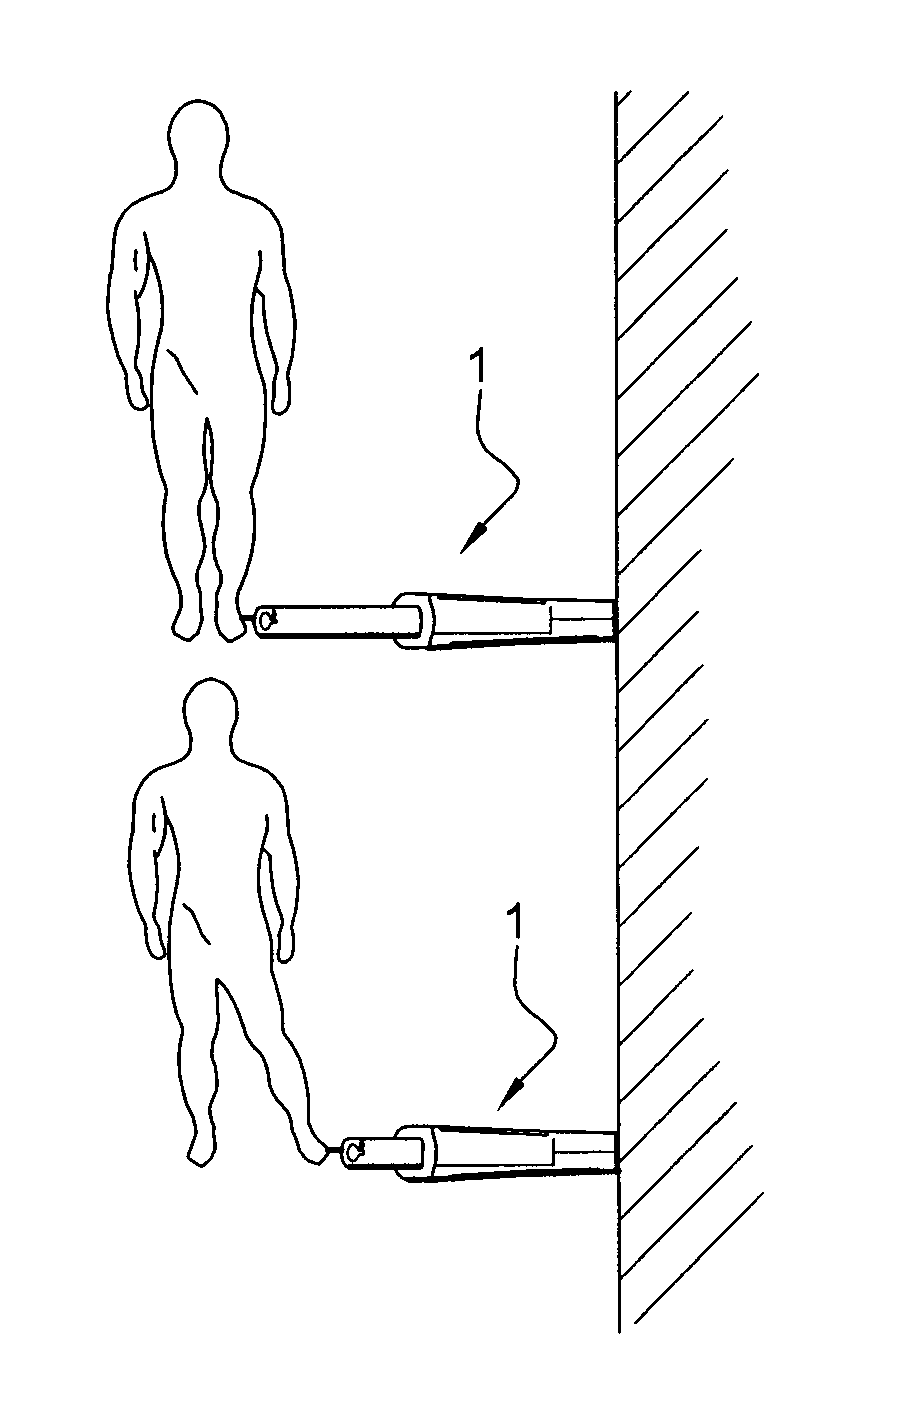 Muscle and/or joint exercise apparatus